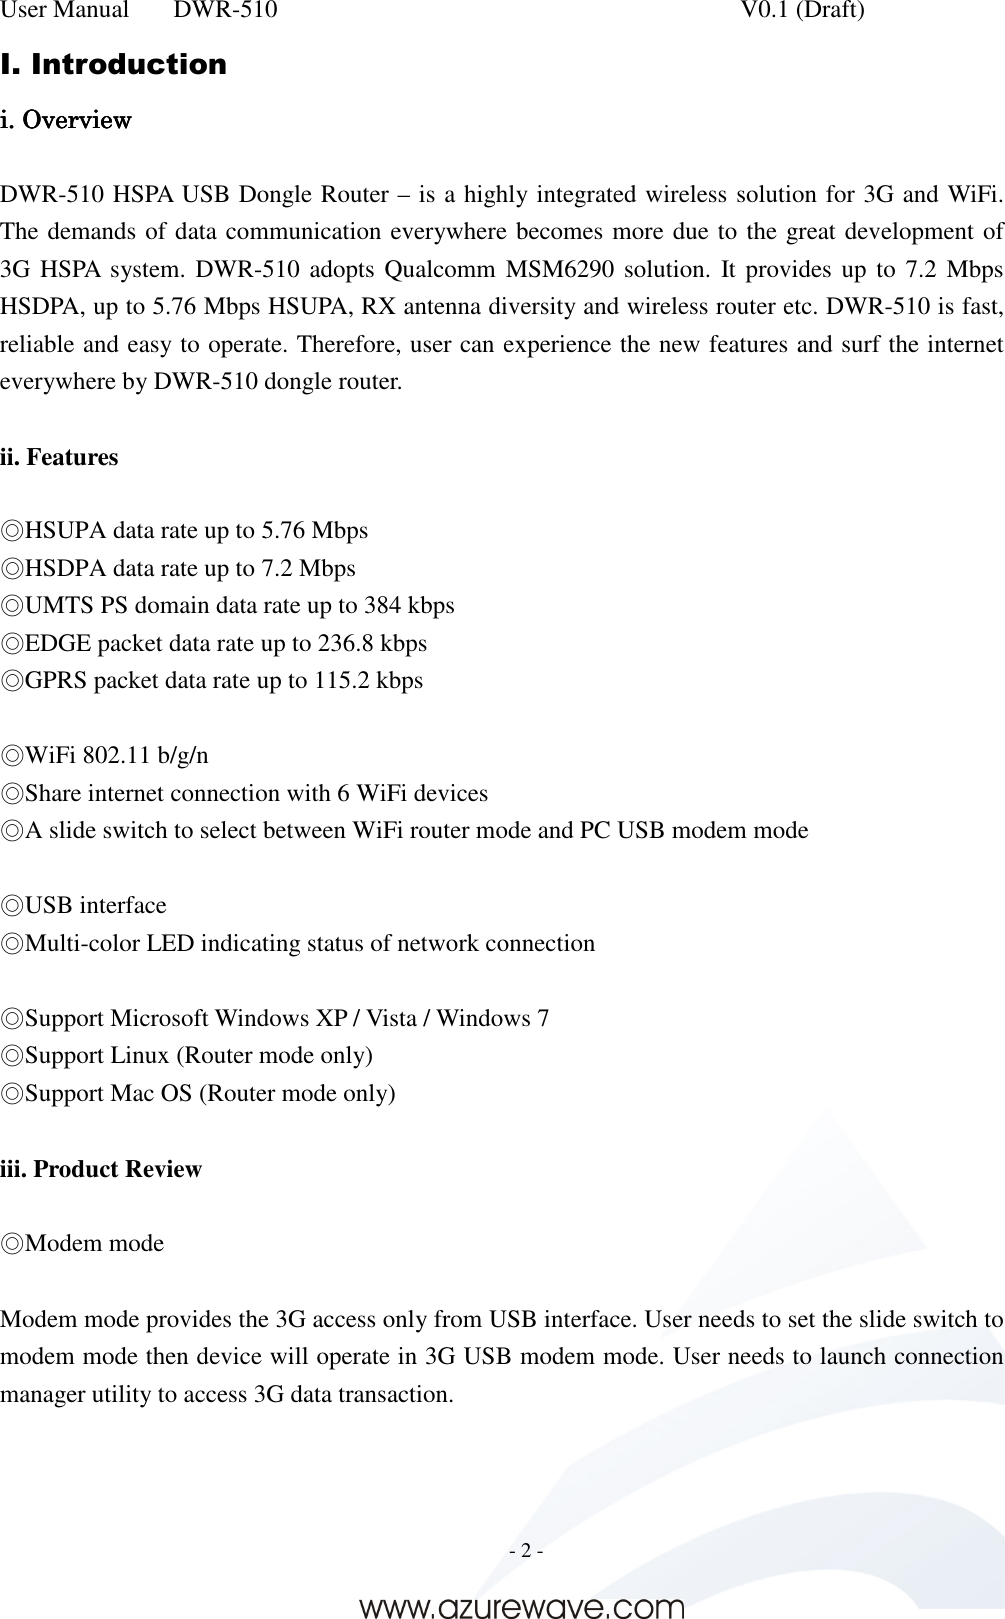 User Manual    DWR-510    V0.1 (Draft)     - 2 -  I. Introduction iiii. Overview. Overview. Overview. Overview     DWR-510 HSPA USB Dongle Router – is a highly integrated wireless solution for 3G and WiFi. The demands of data communication everywhere becomes more due to the great development of 3G HSPA system. DWR-510 adopts  Qualcomm  MSM6290 solution. It provides up  to 7.2 Mbps HSDPA, up to 5.76 Mbps HSUPA, RX antenna diversity and wireless router etc. DWR-510 is fast, reliable and easy to operate. Therefore, user can experience the new features and surf the internet everywhere by DWR-510 dongle router.  ii. Features  ◎HSUPA data rate up to 5.76 Mbps ◎HSDPA data rate up to 7.2 Mbps ◎UMTS PS domain data rate up to 384 kbps ◎EDGE packet data rate up to 236.8 kbps ◎GPRS packet data rate up to 115.2 kbps  ◎WiFi 802.11 b/g/n ◎Share internet connection with 6 WiFi devices ◎A slide switch to select between WiFi router mode and PC USB modem mode  ◎USB interface ◎Multi-color LED indicating status of network connection  ◎Support Microsoft Windows XP / Vista / Windows 7 ◎Support Linux (Router mode only) ◎Support Mac OS (Router mode only)  iii. Product Review  ◎Modem mode  Modem mode provides the 3G access only from USB interface. User needs to set the slide switch to modem mode then device will operate in 3G USB modem mode. User needs to launch connection manager utility to access 3G data transaction.    